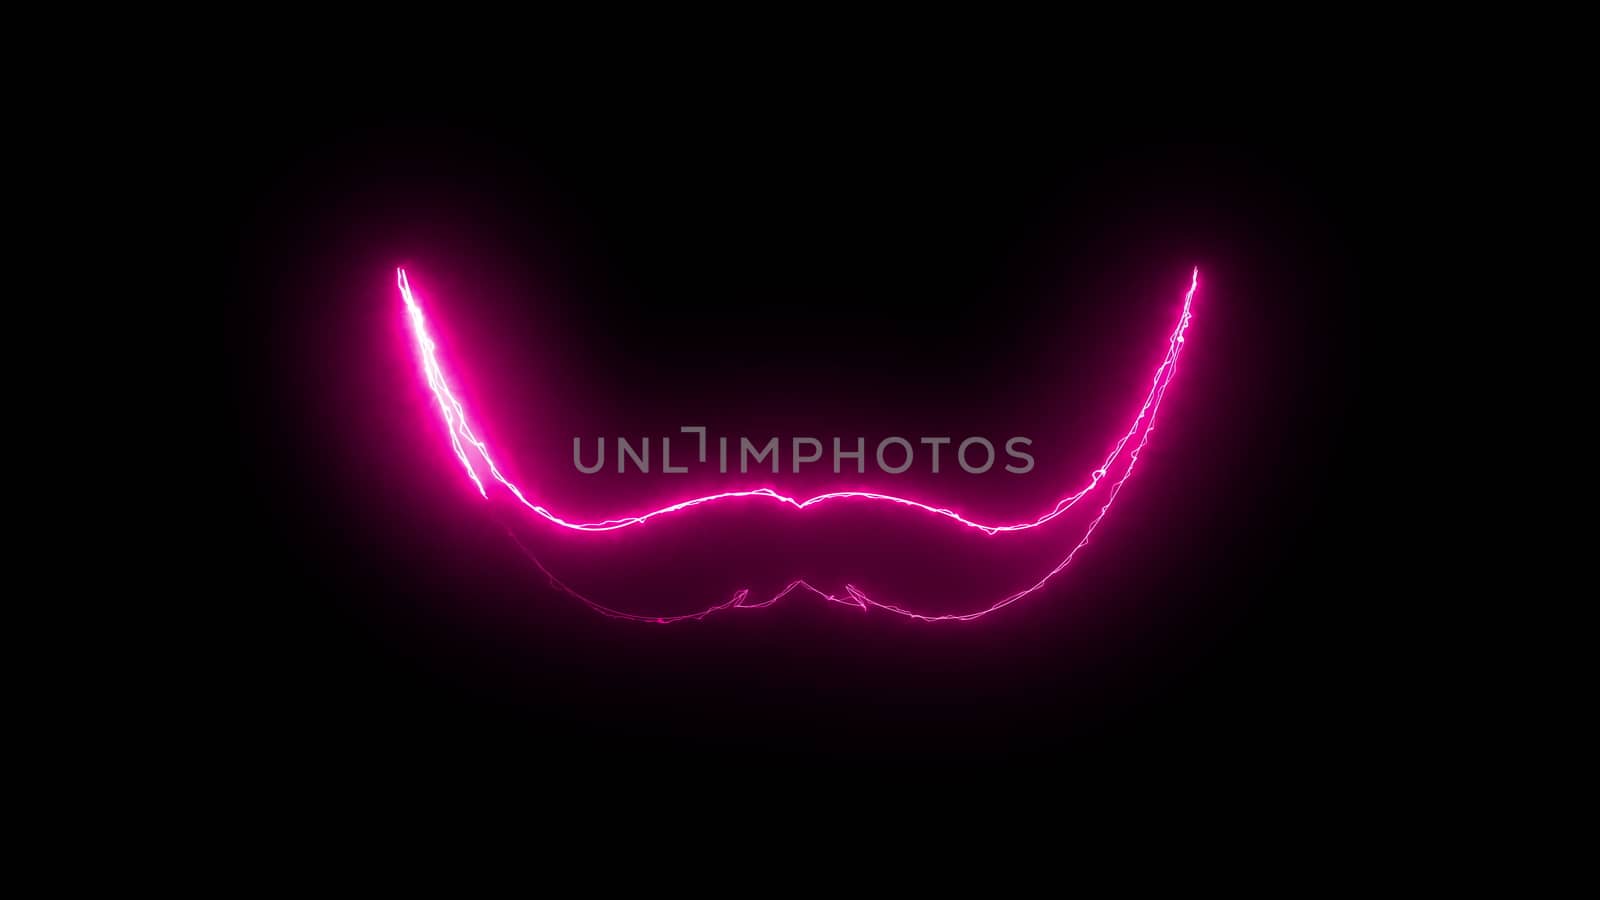 Computer generated abstract background with neon light draws a mustache shape. 3D rendering mustache icon of luminous shiny lines